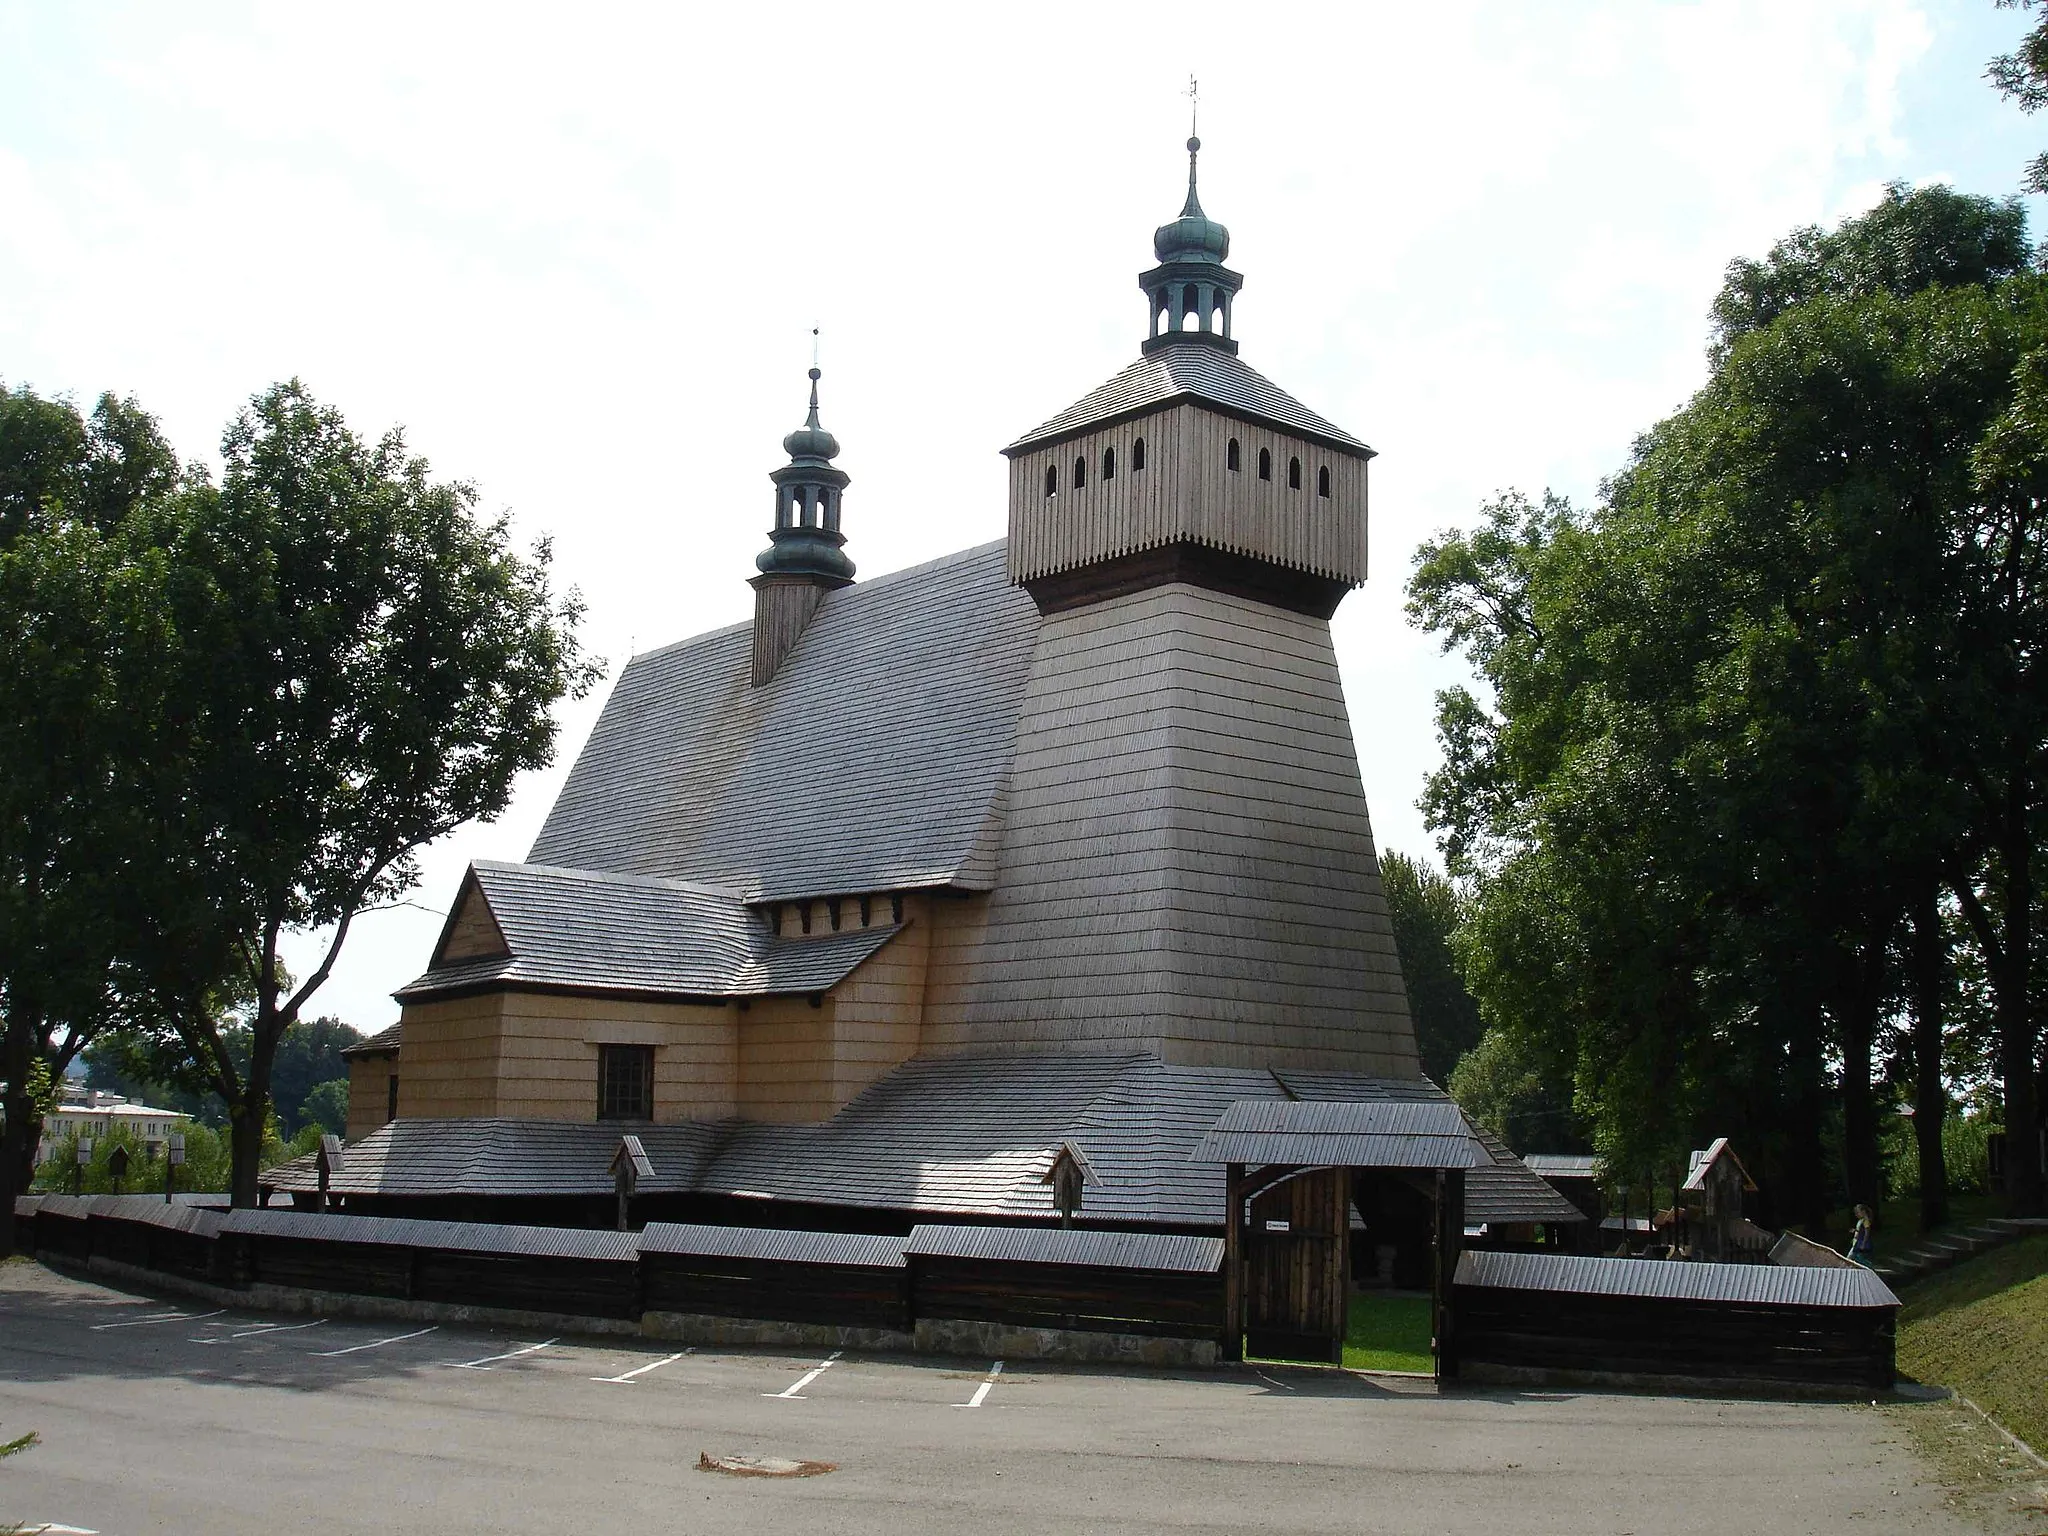 Photo showing: Church under call of Assumption of Holy Mary and St. Michael's Archangel  in Haczów (Poland), the oldest wooden gothic temples in Europe, erected in the 14th century, on the UNESCO list of World Heritage Sites since 2003.